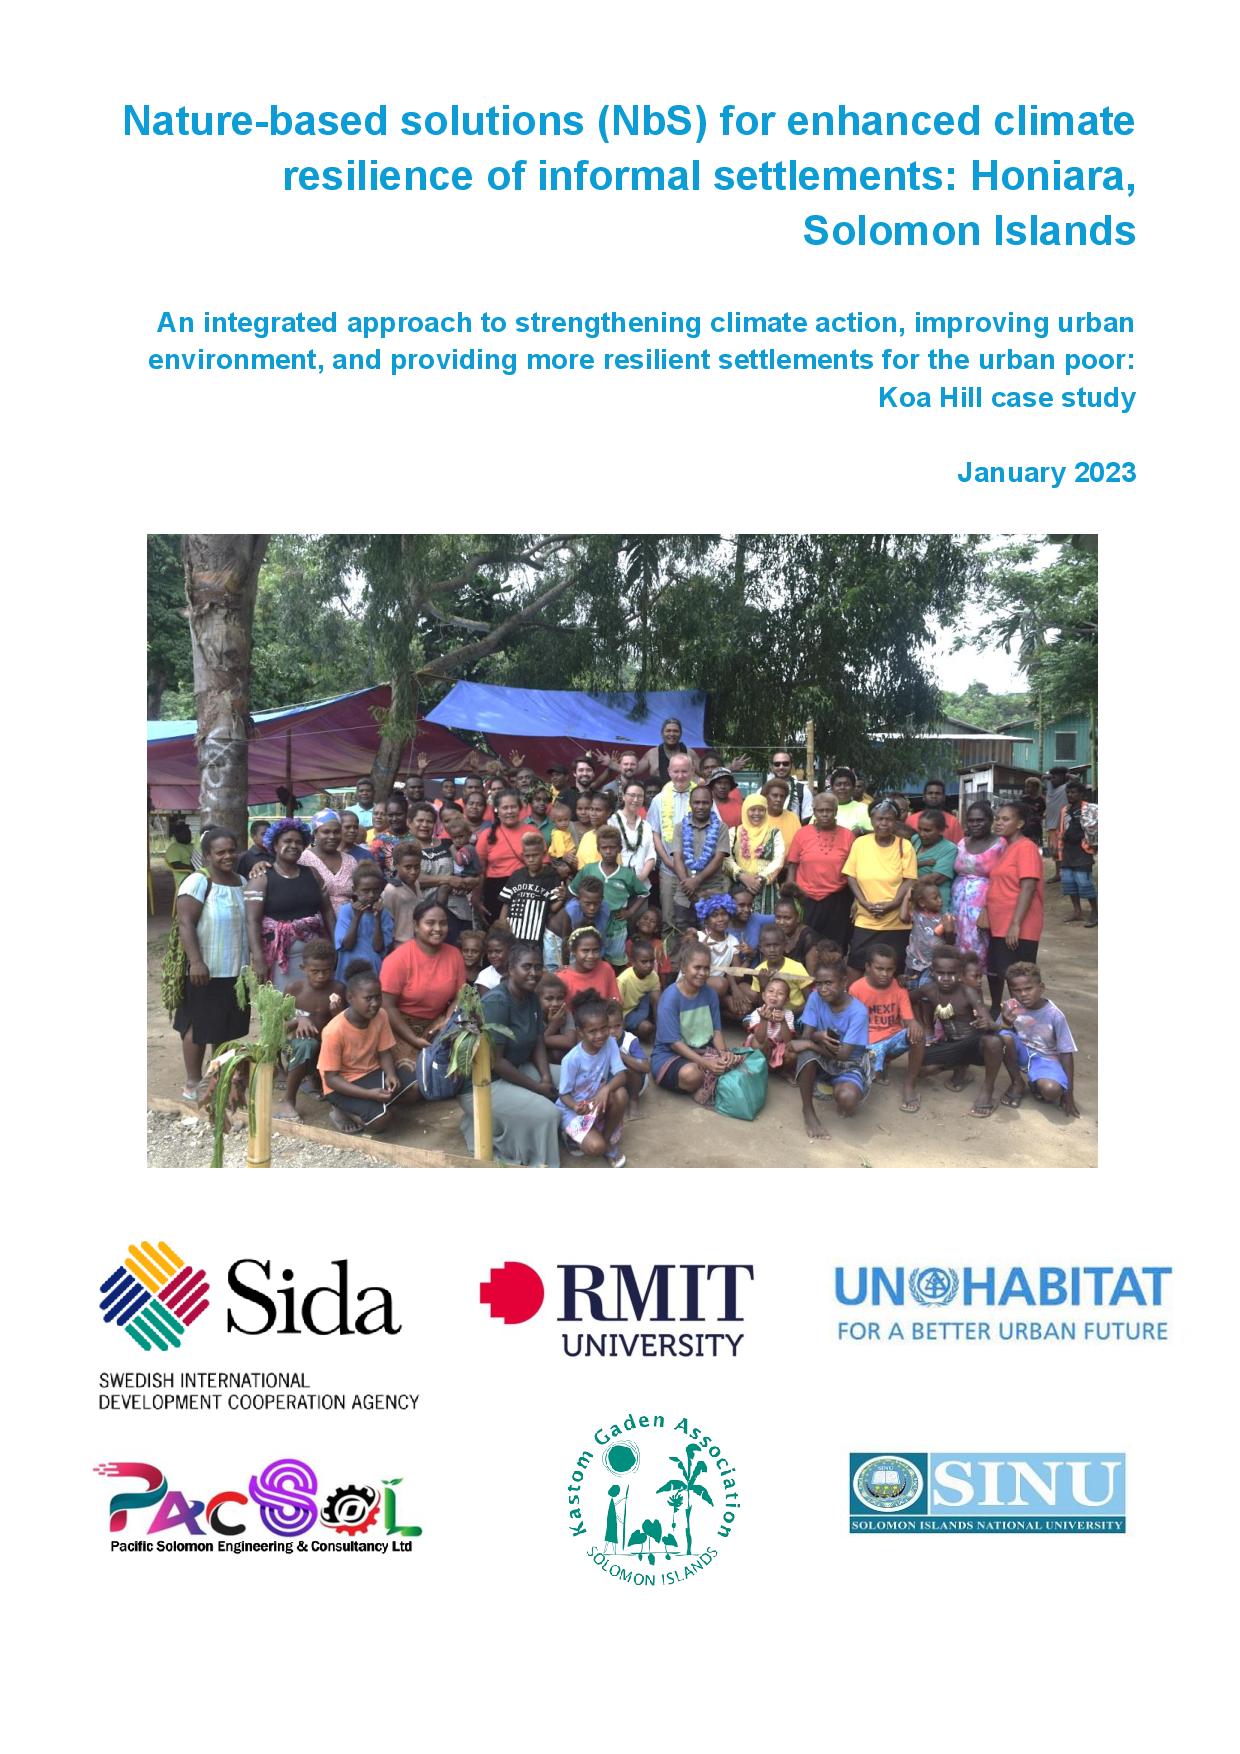 Nature-based solutions (NbS) for enhanced climate resilience of informal settlements: Honiara, Solomon Islands